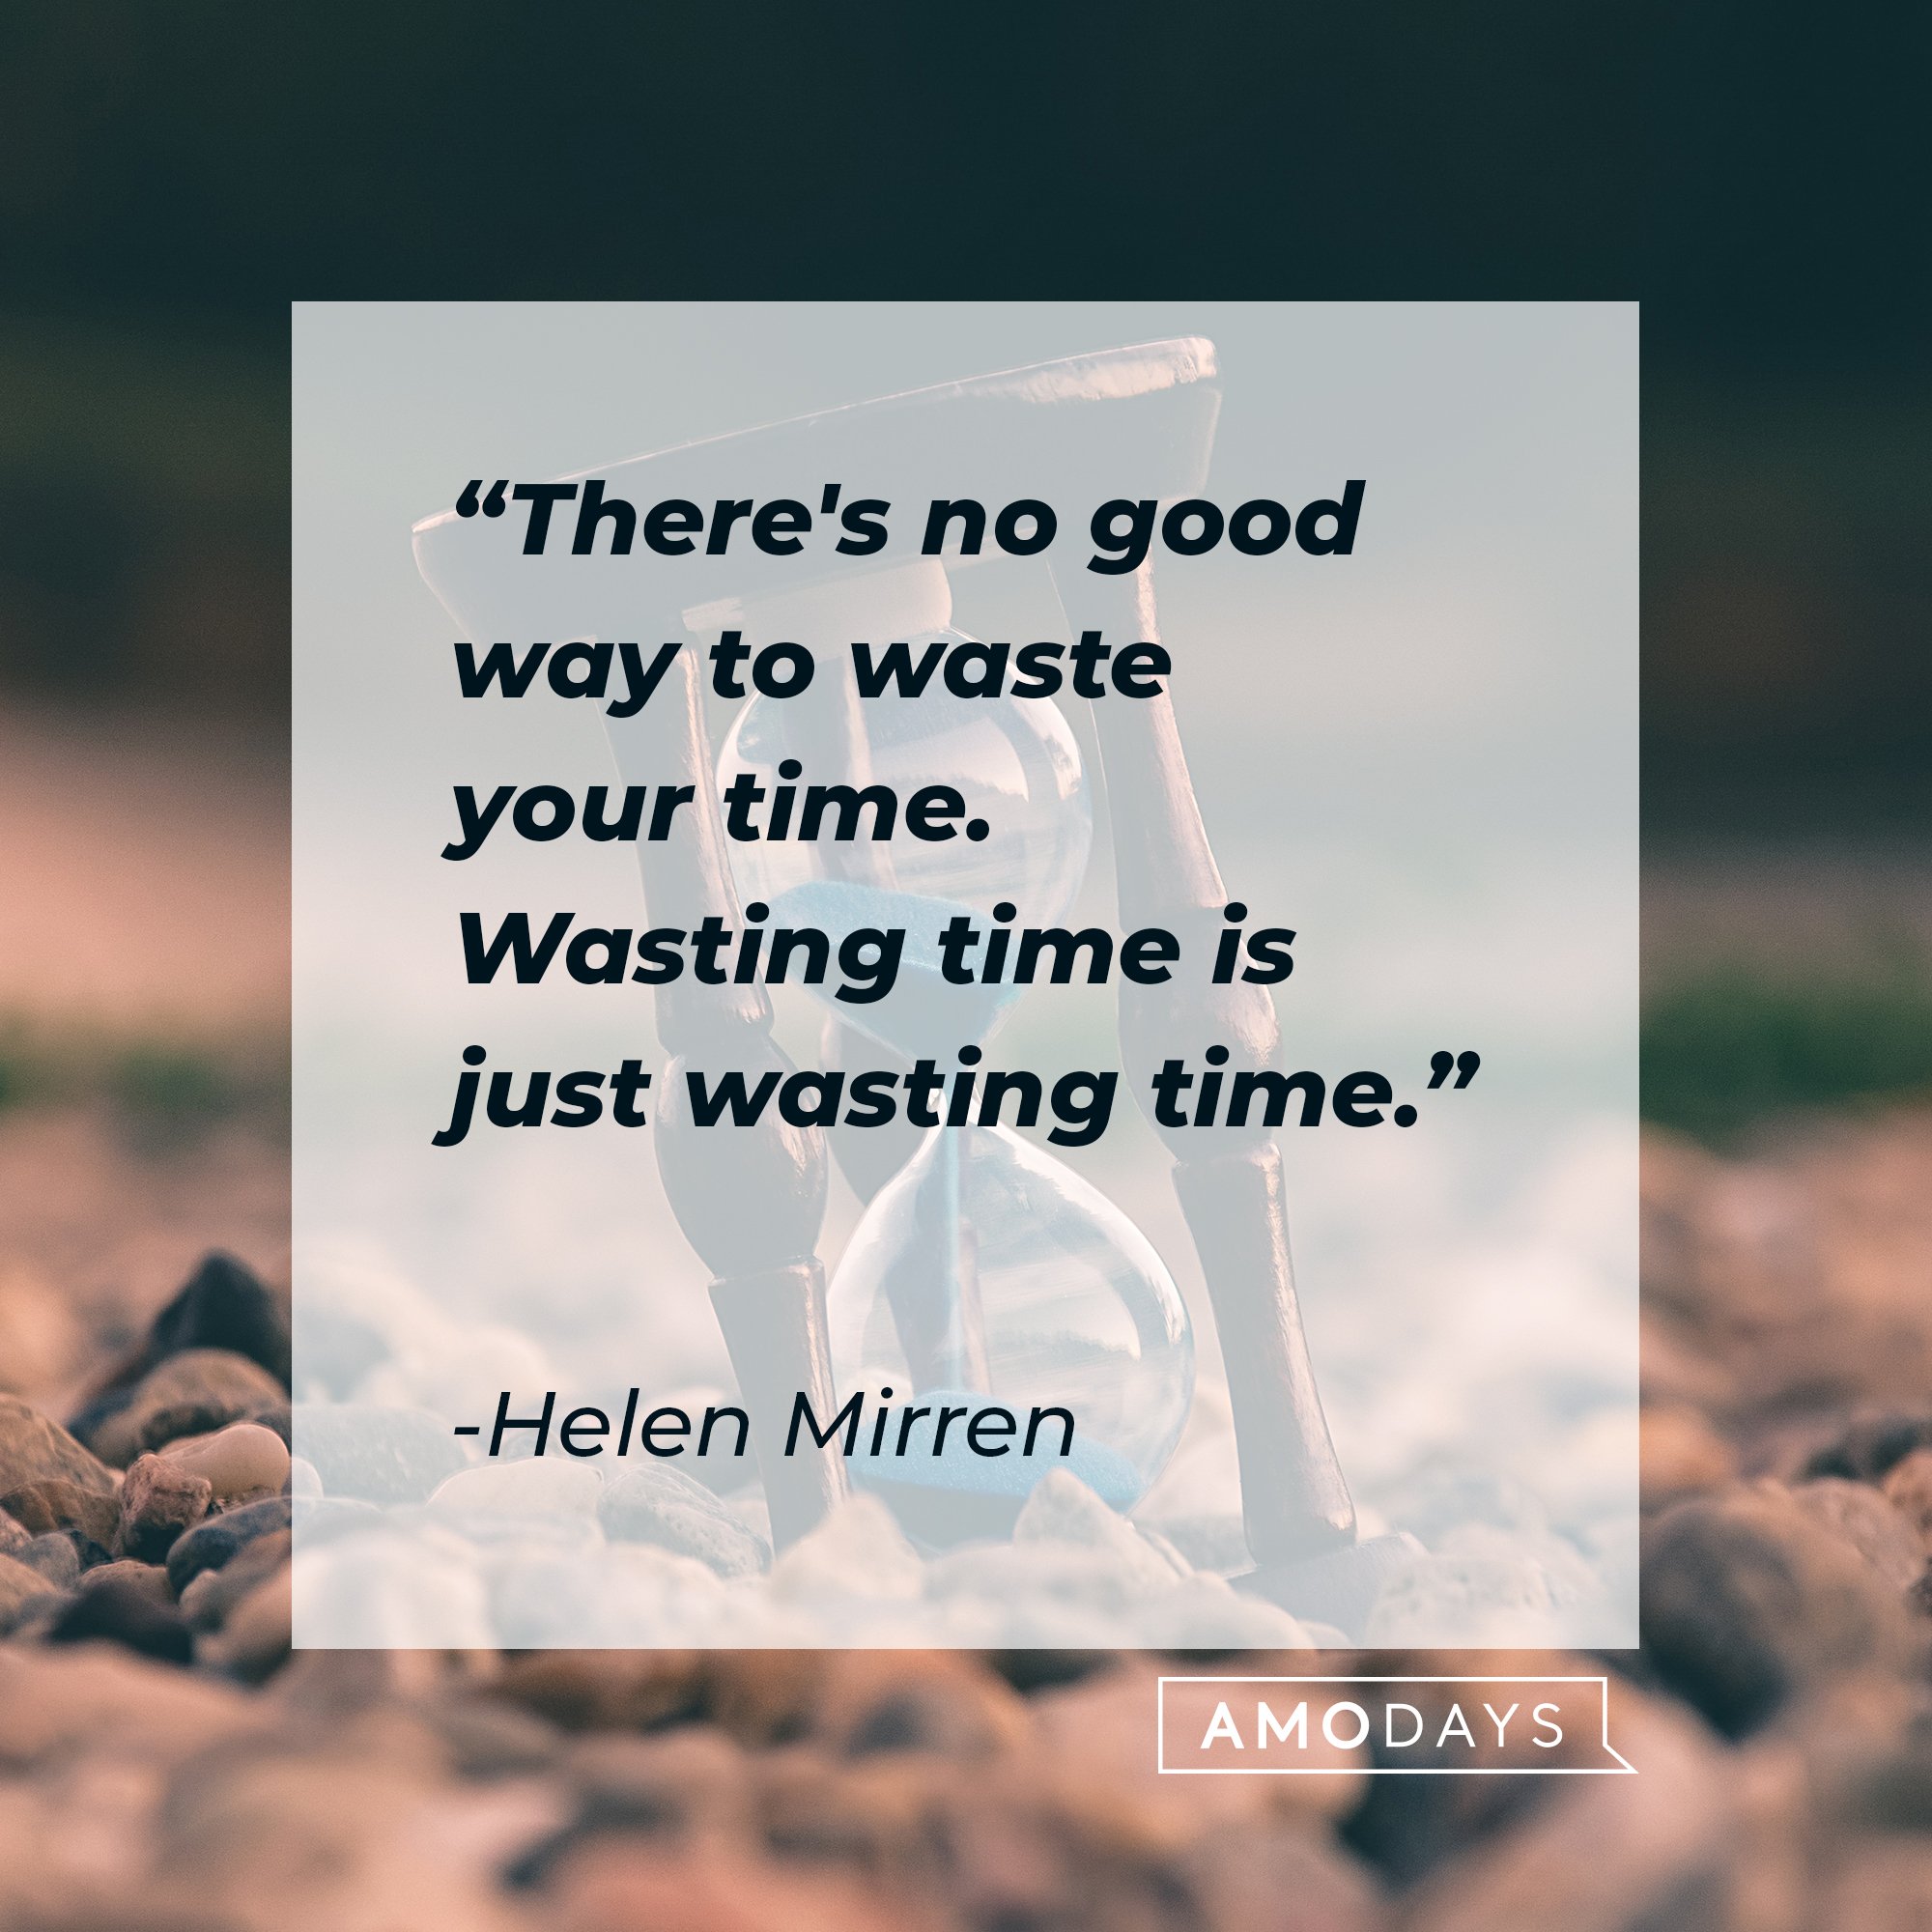 Helen Mirren's quote: “There's no good way to waste your time. Wasting time is just wasting time." | Image: AmoDays  